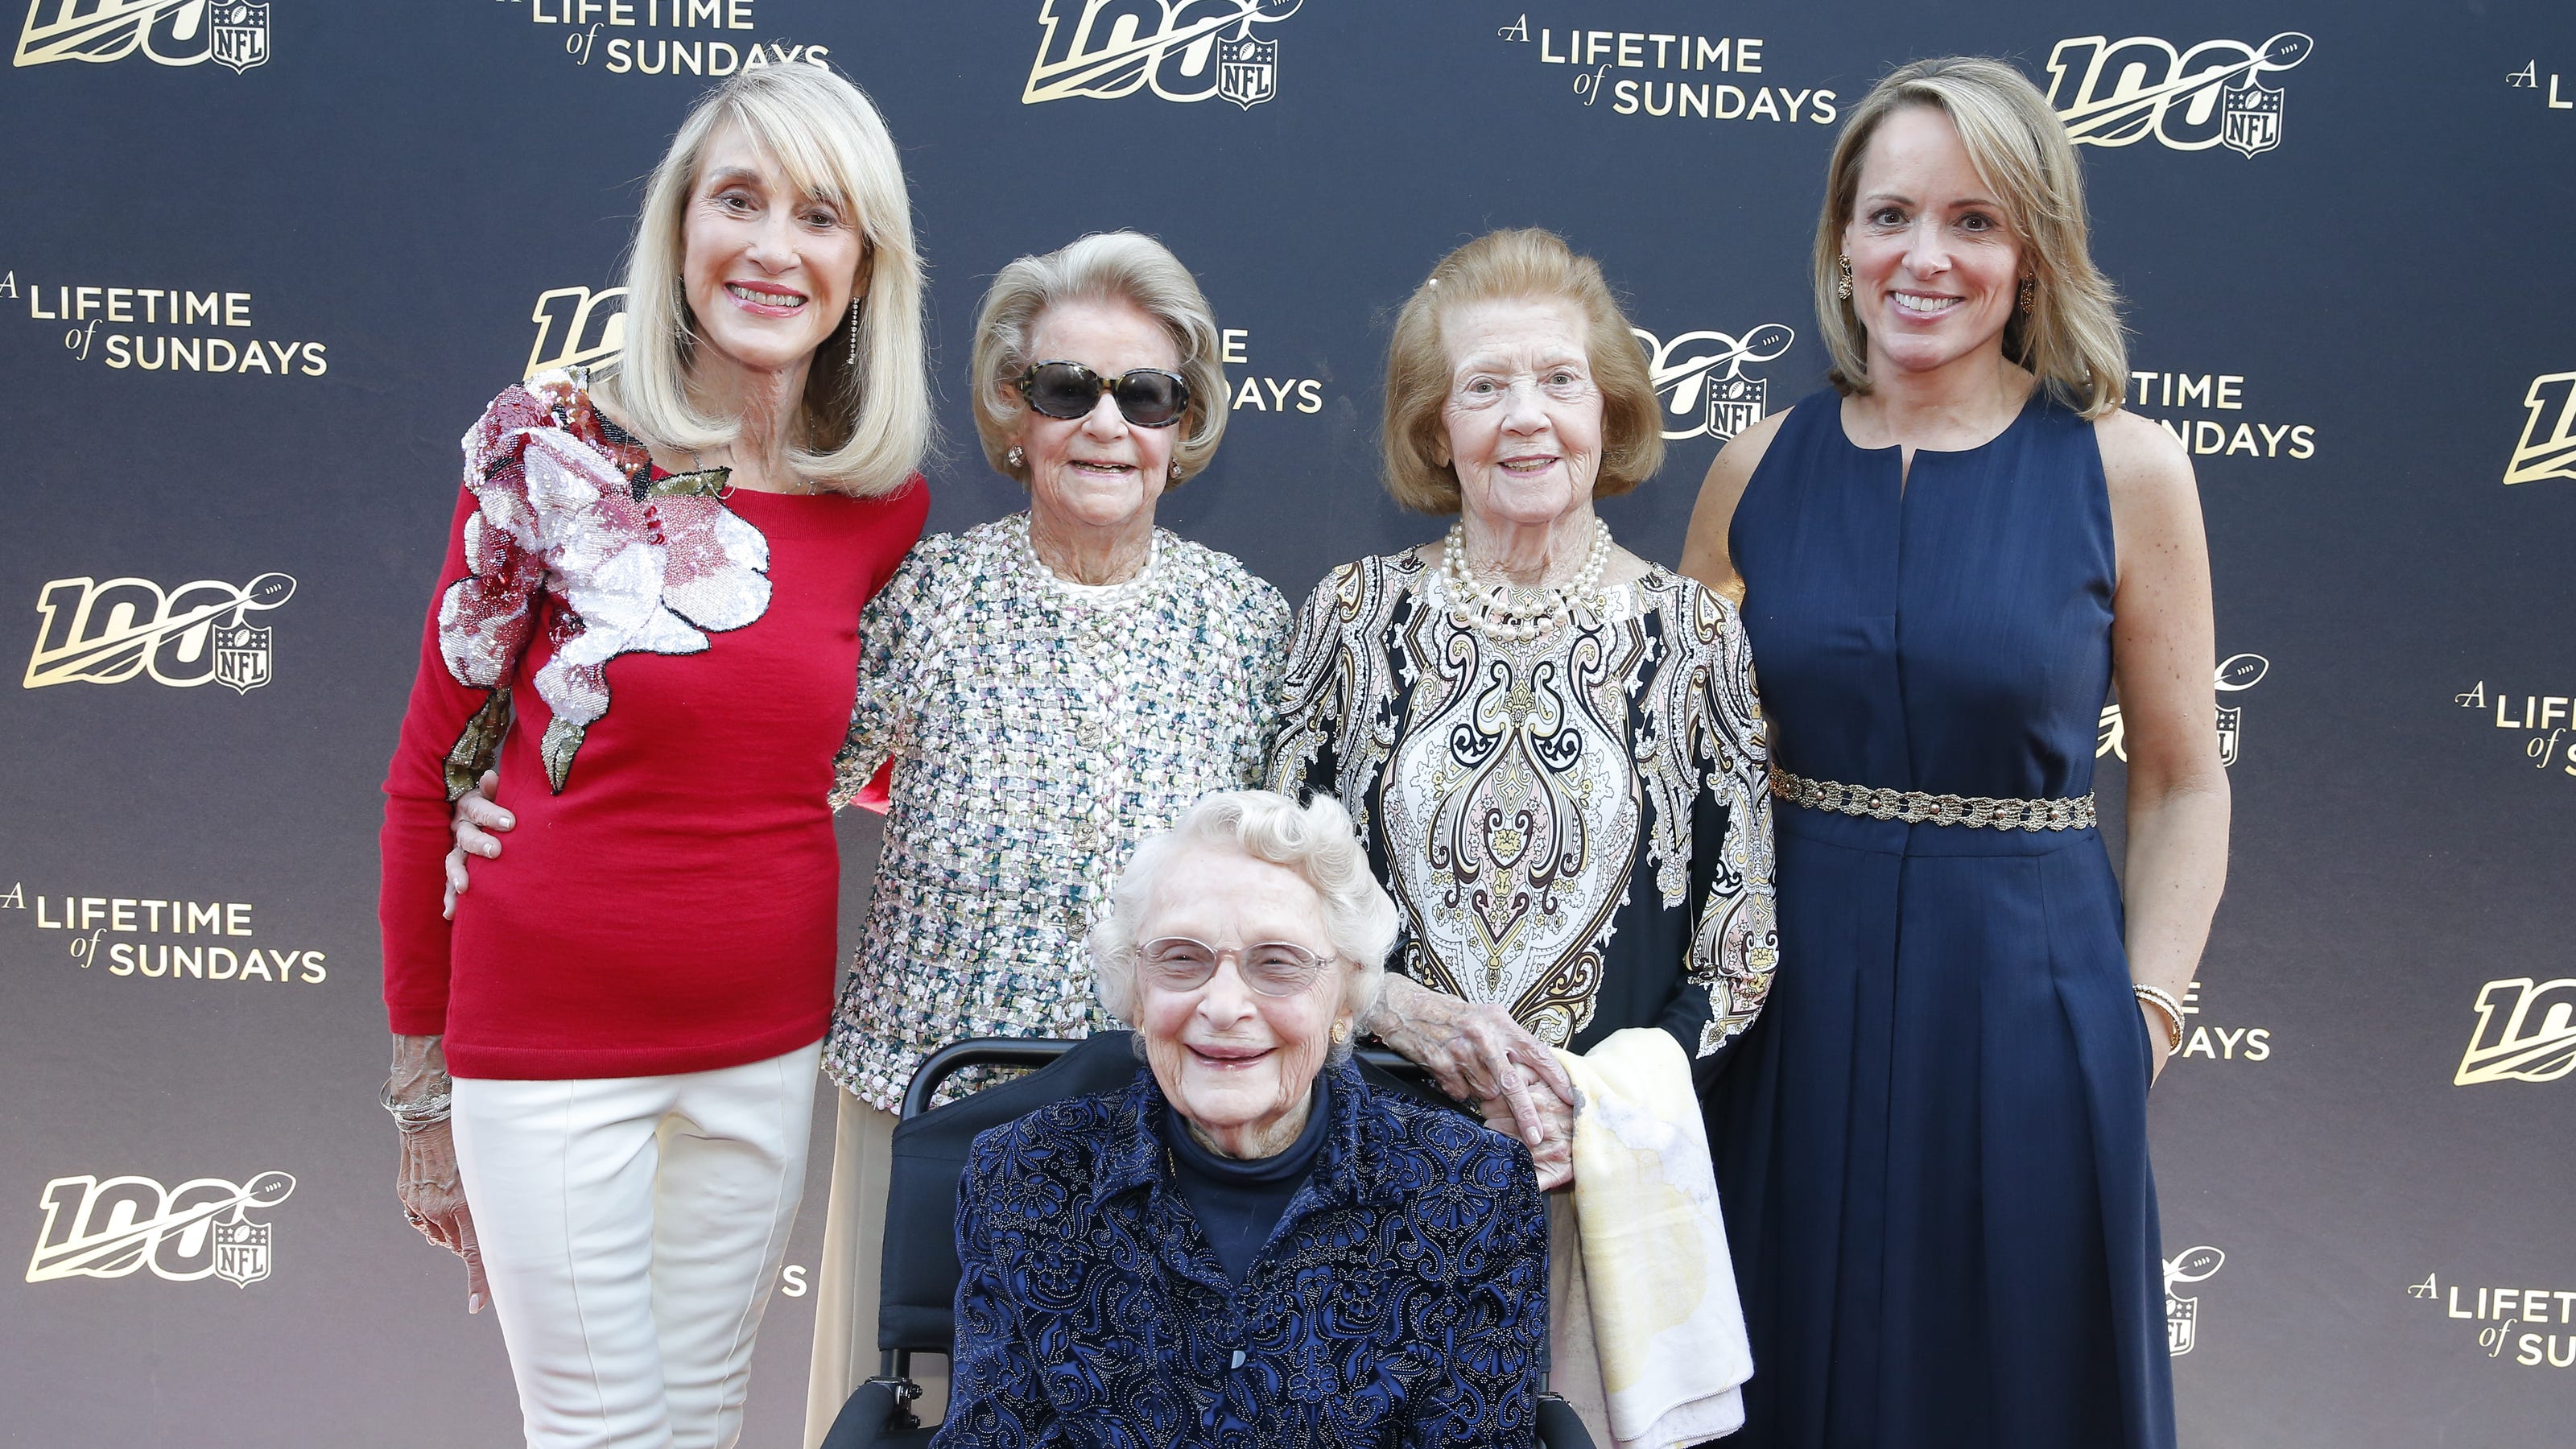 Four Female Nfl Team Owners Offer Glimpse Of Sports History In Film 